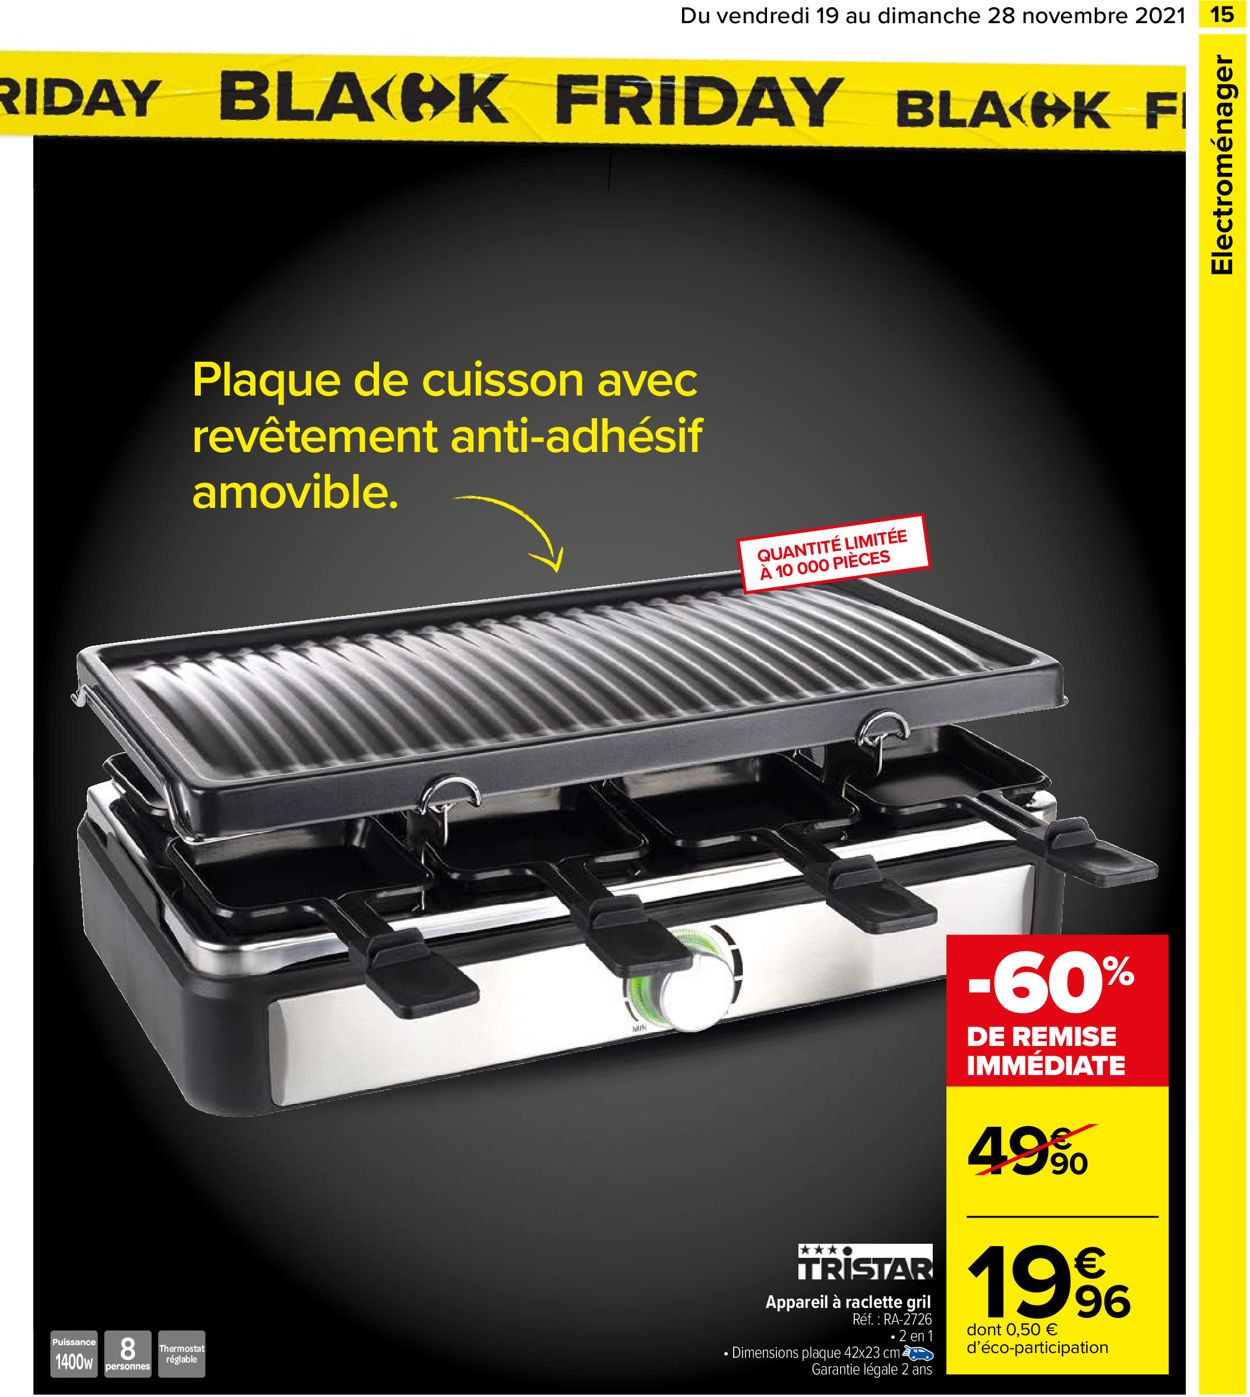 Carrefour BLACK WEEK 2021 Catalogue - 19.11-28.11.2021 (Page 15)